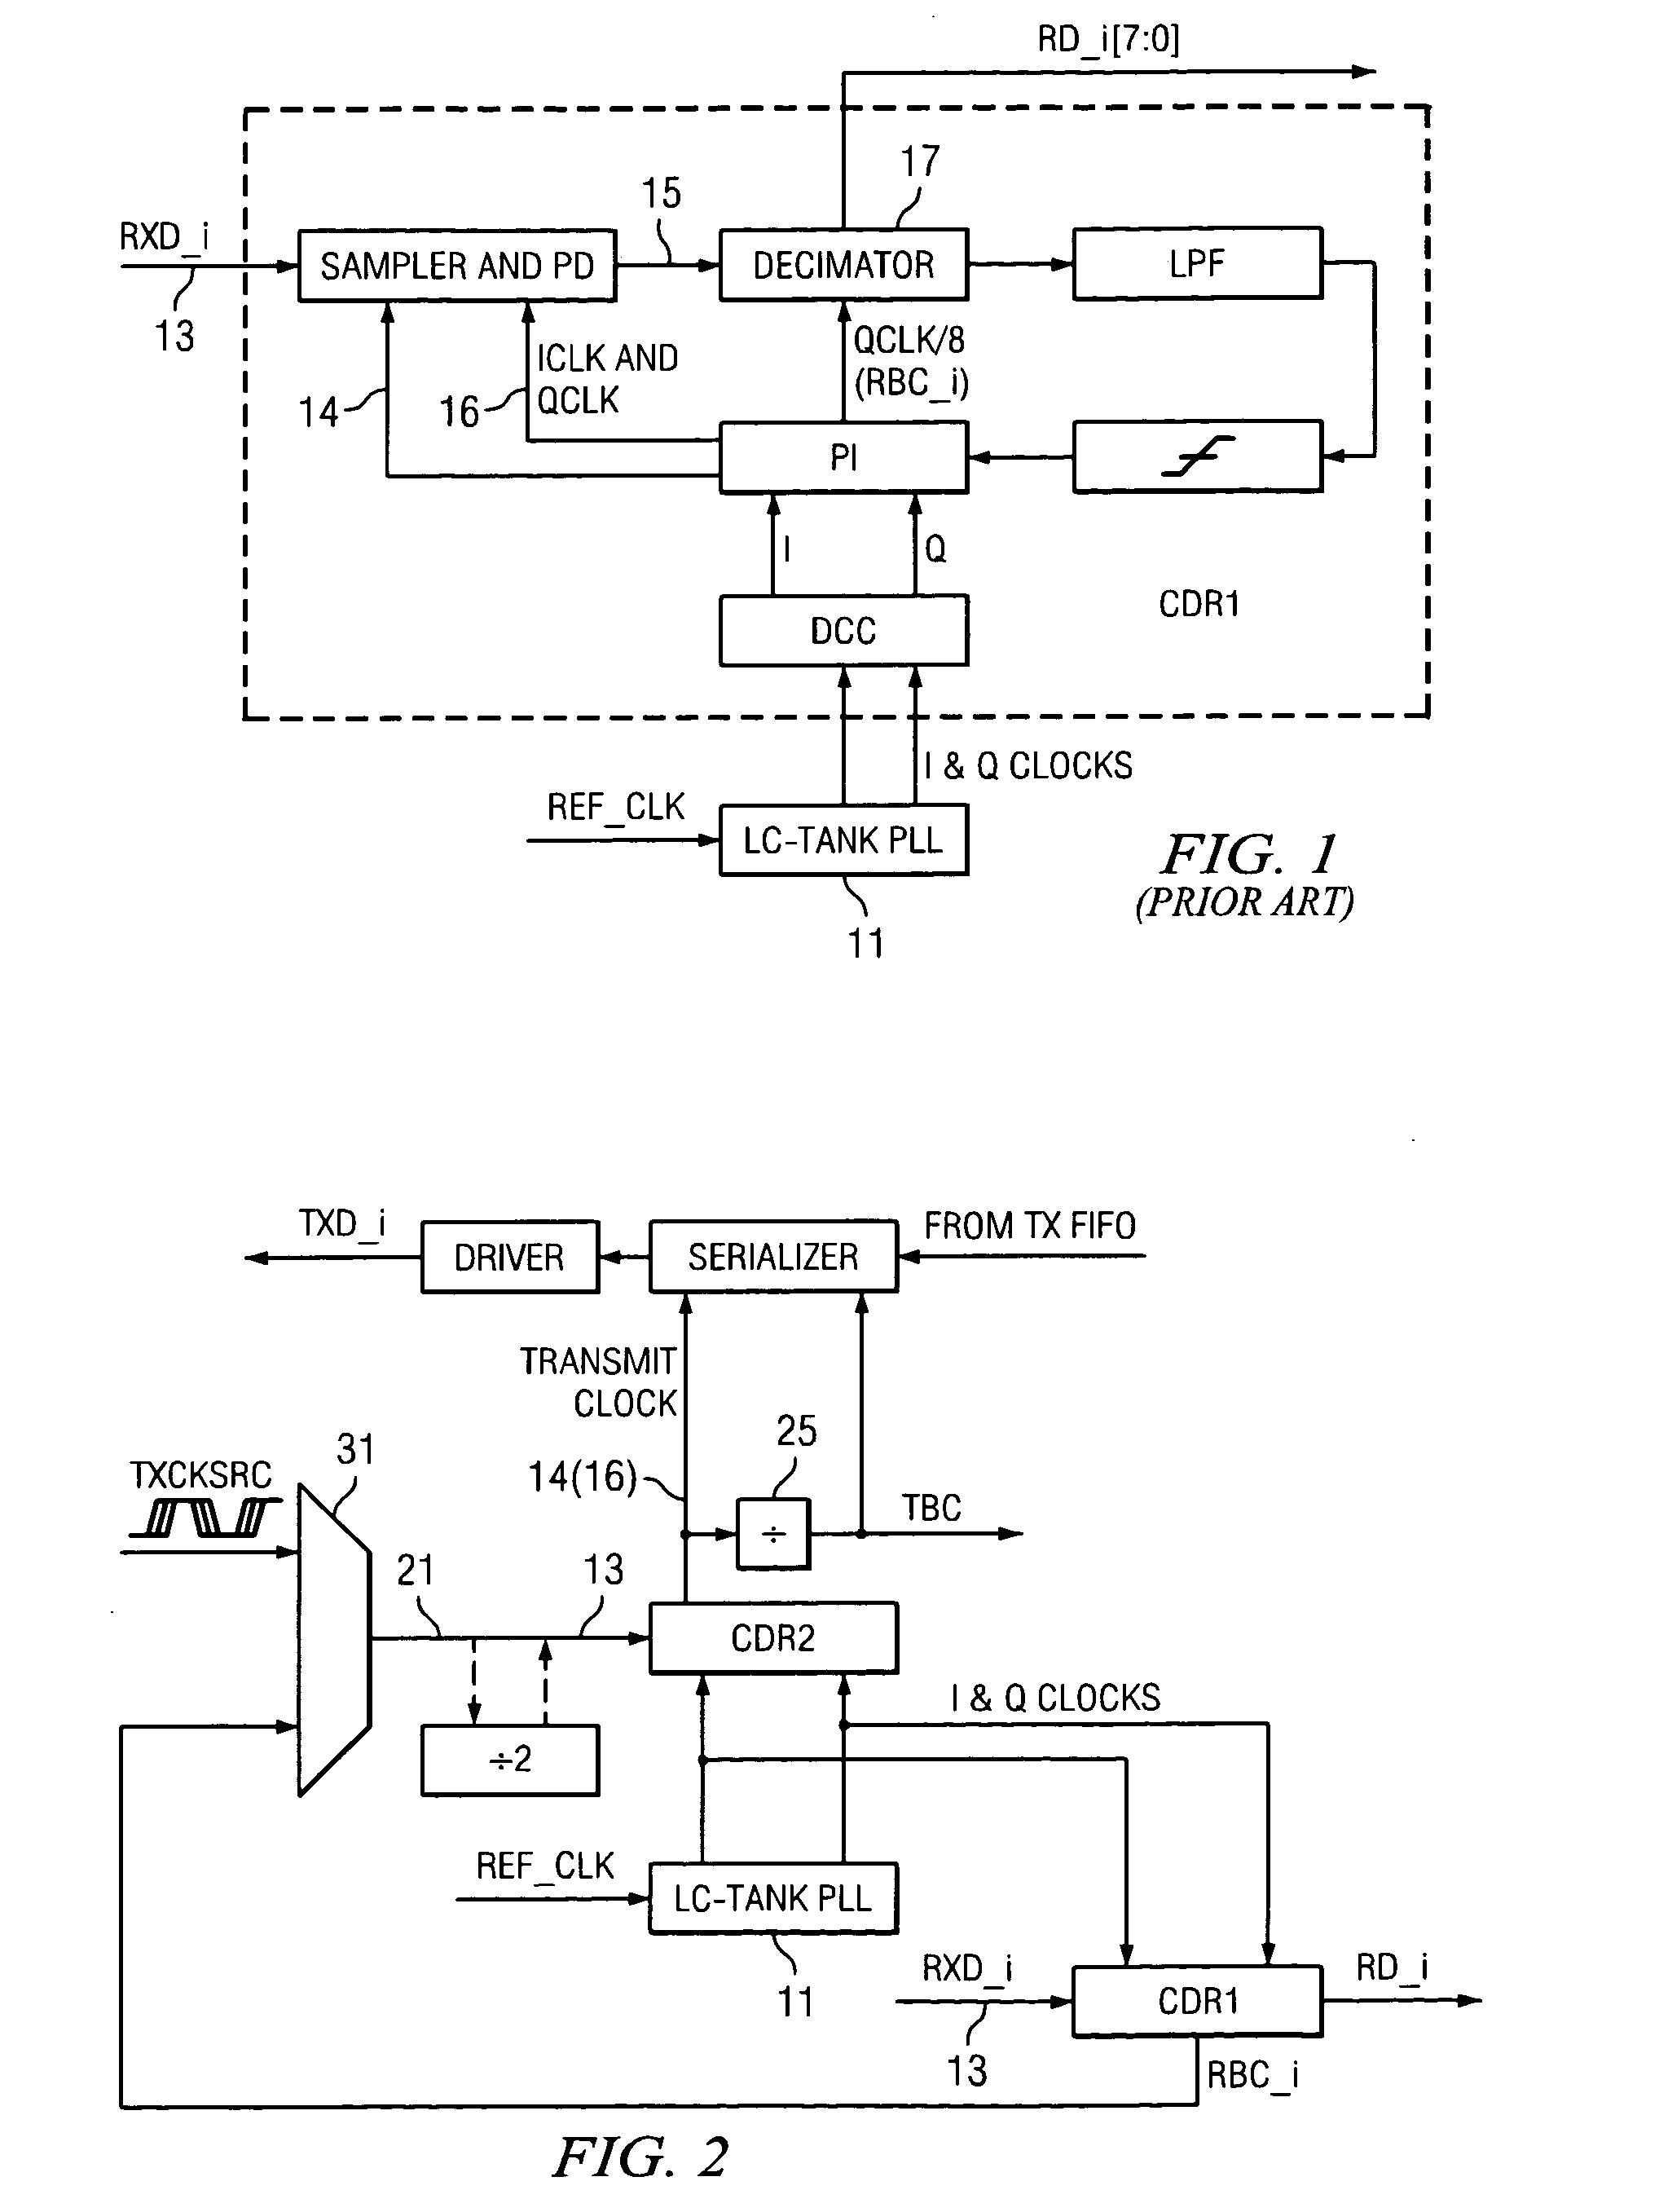 CDR-based clock synthesis